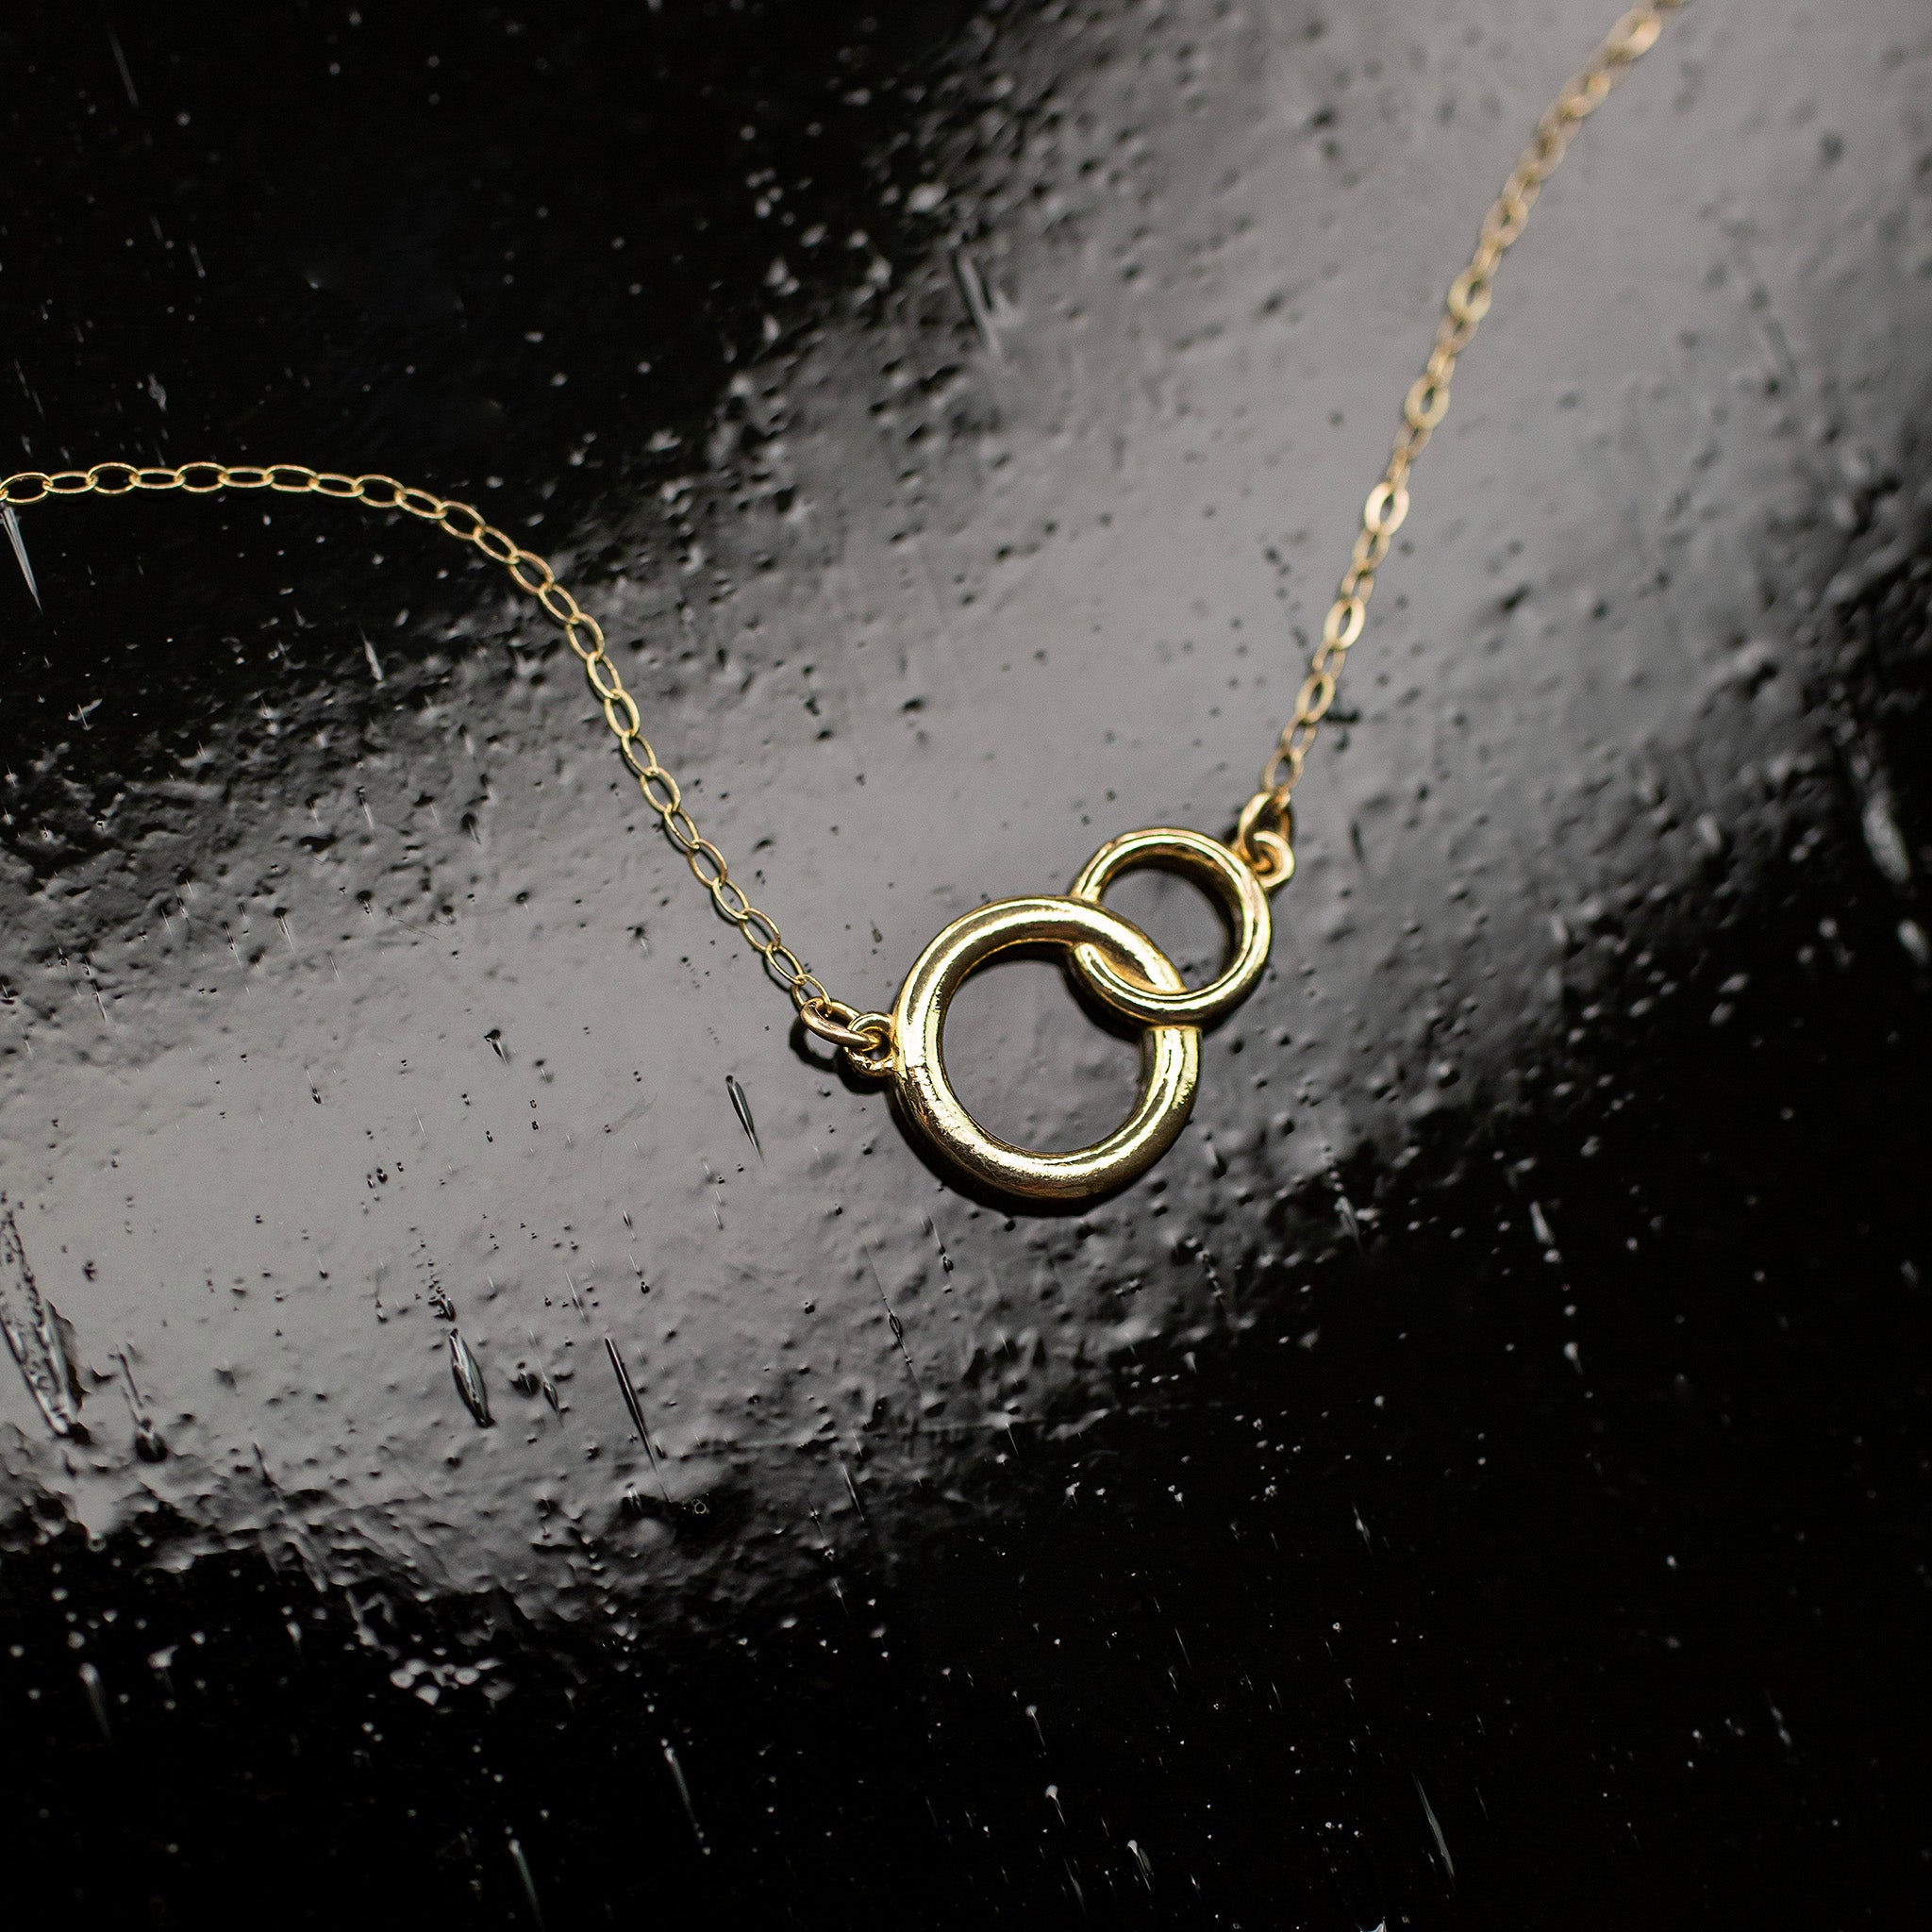 Buy Circles Necklace, Two Circles Necklace, Circles Pendant, Infinity  Necklace, Couple Necklace, Sterling Silver Necklace, Minimalist Necklace  Online in India - Etsy